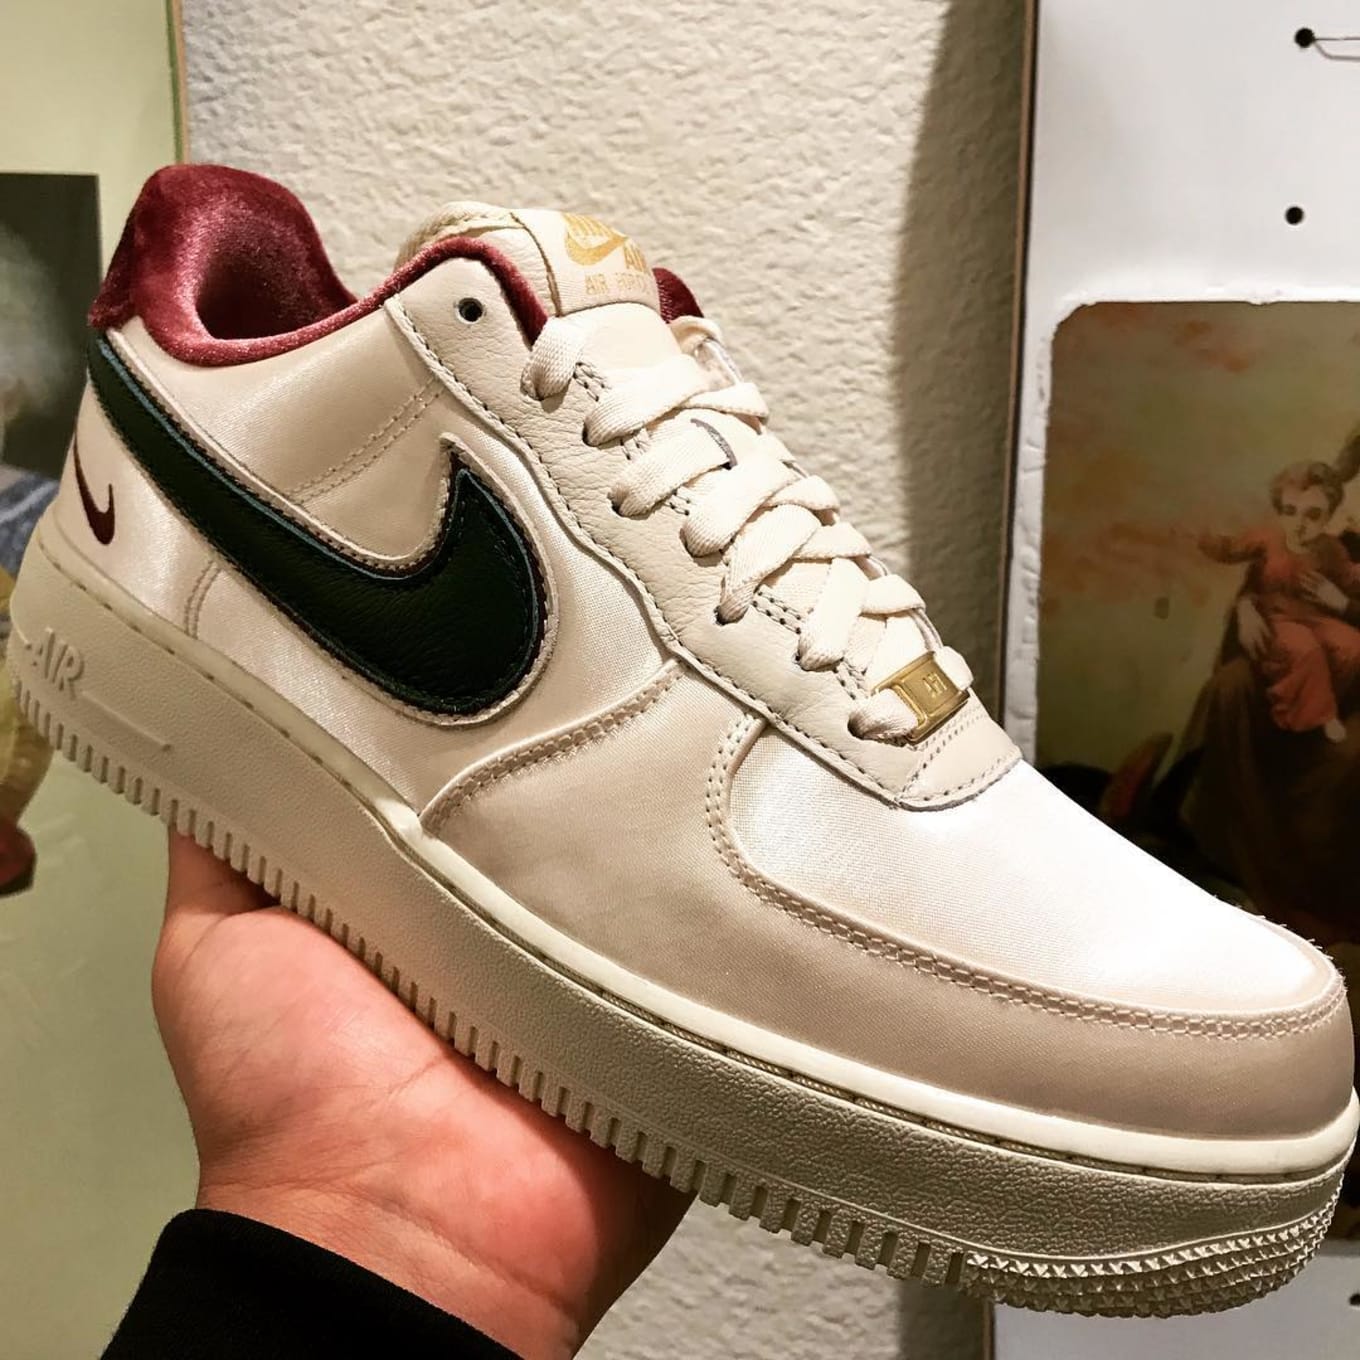 nikeid air force 1 low